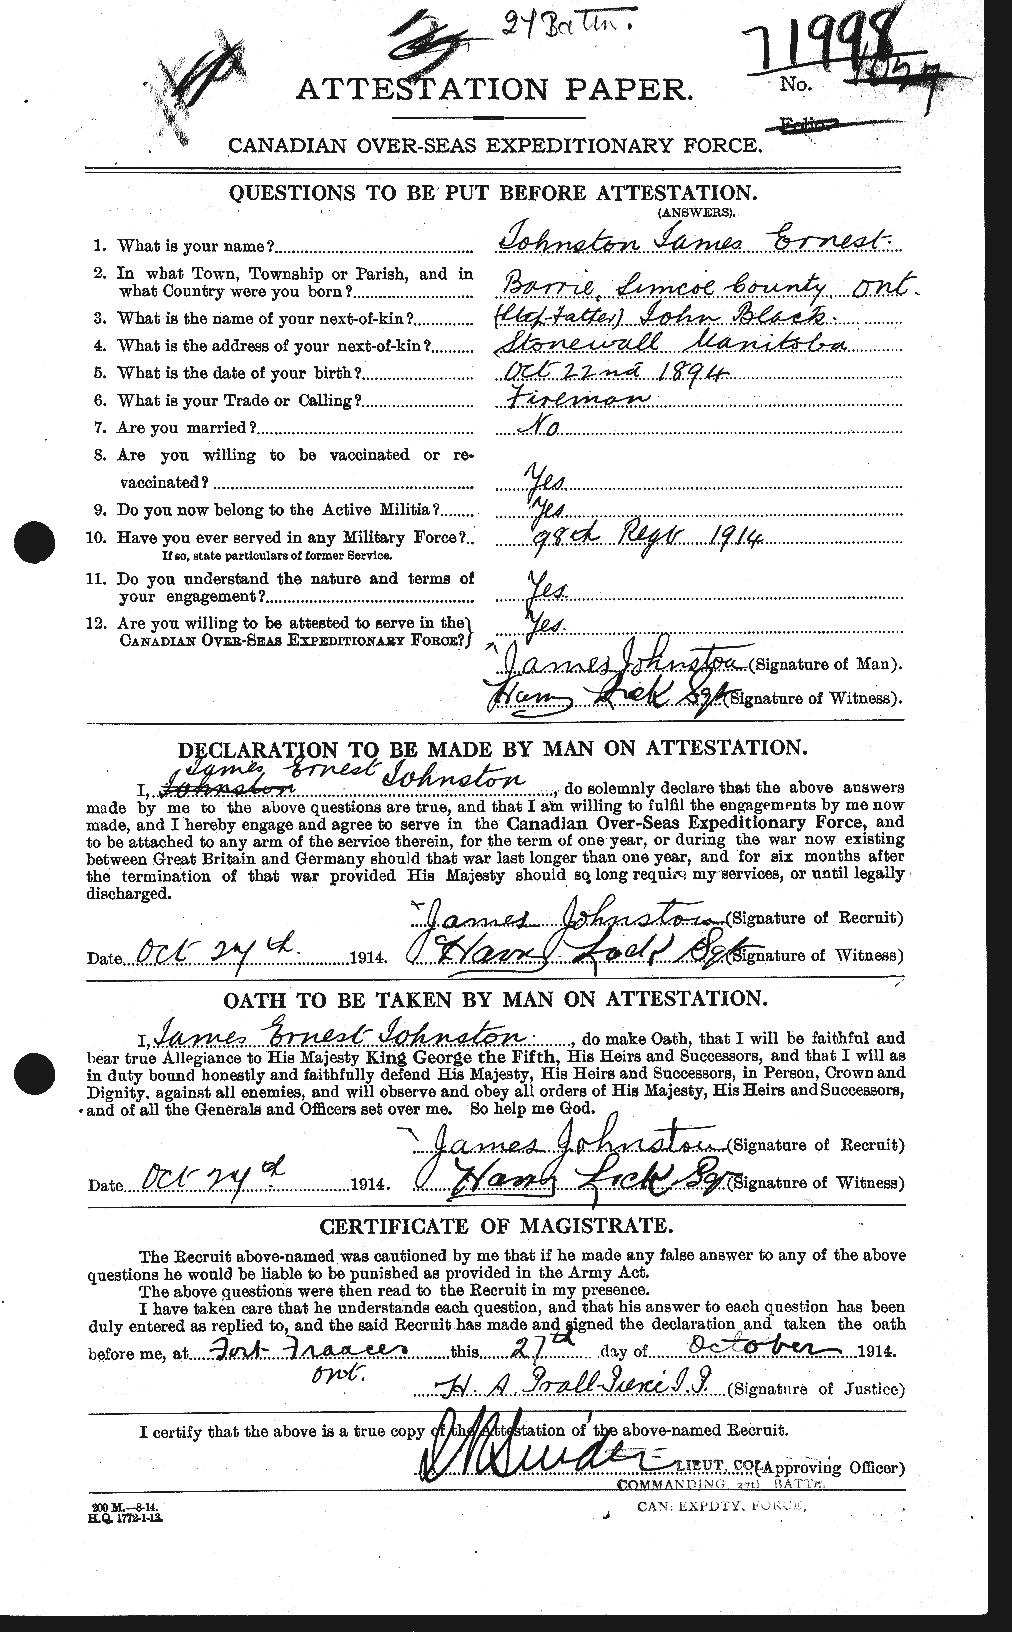 Personnel Records of the First World War - CEF 422732a